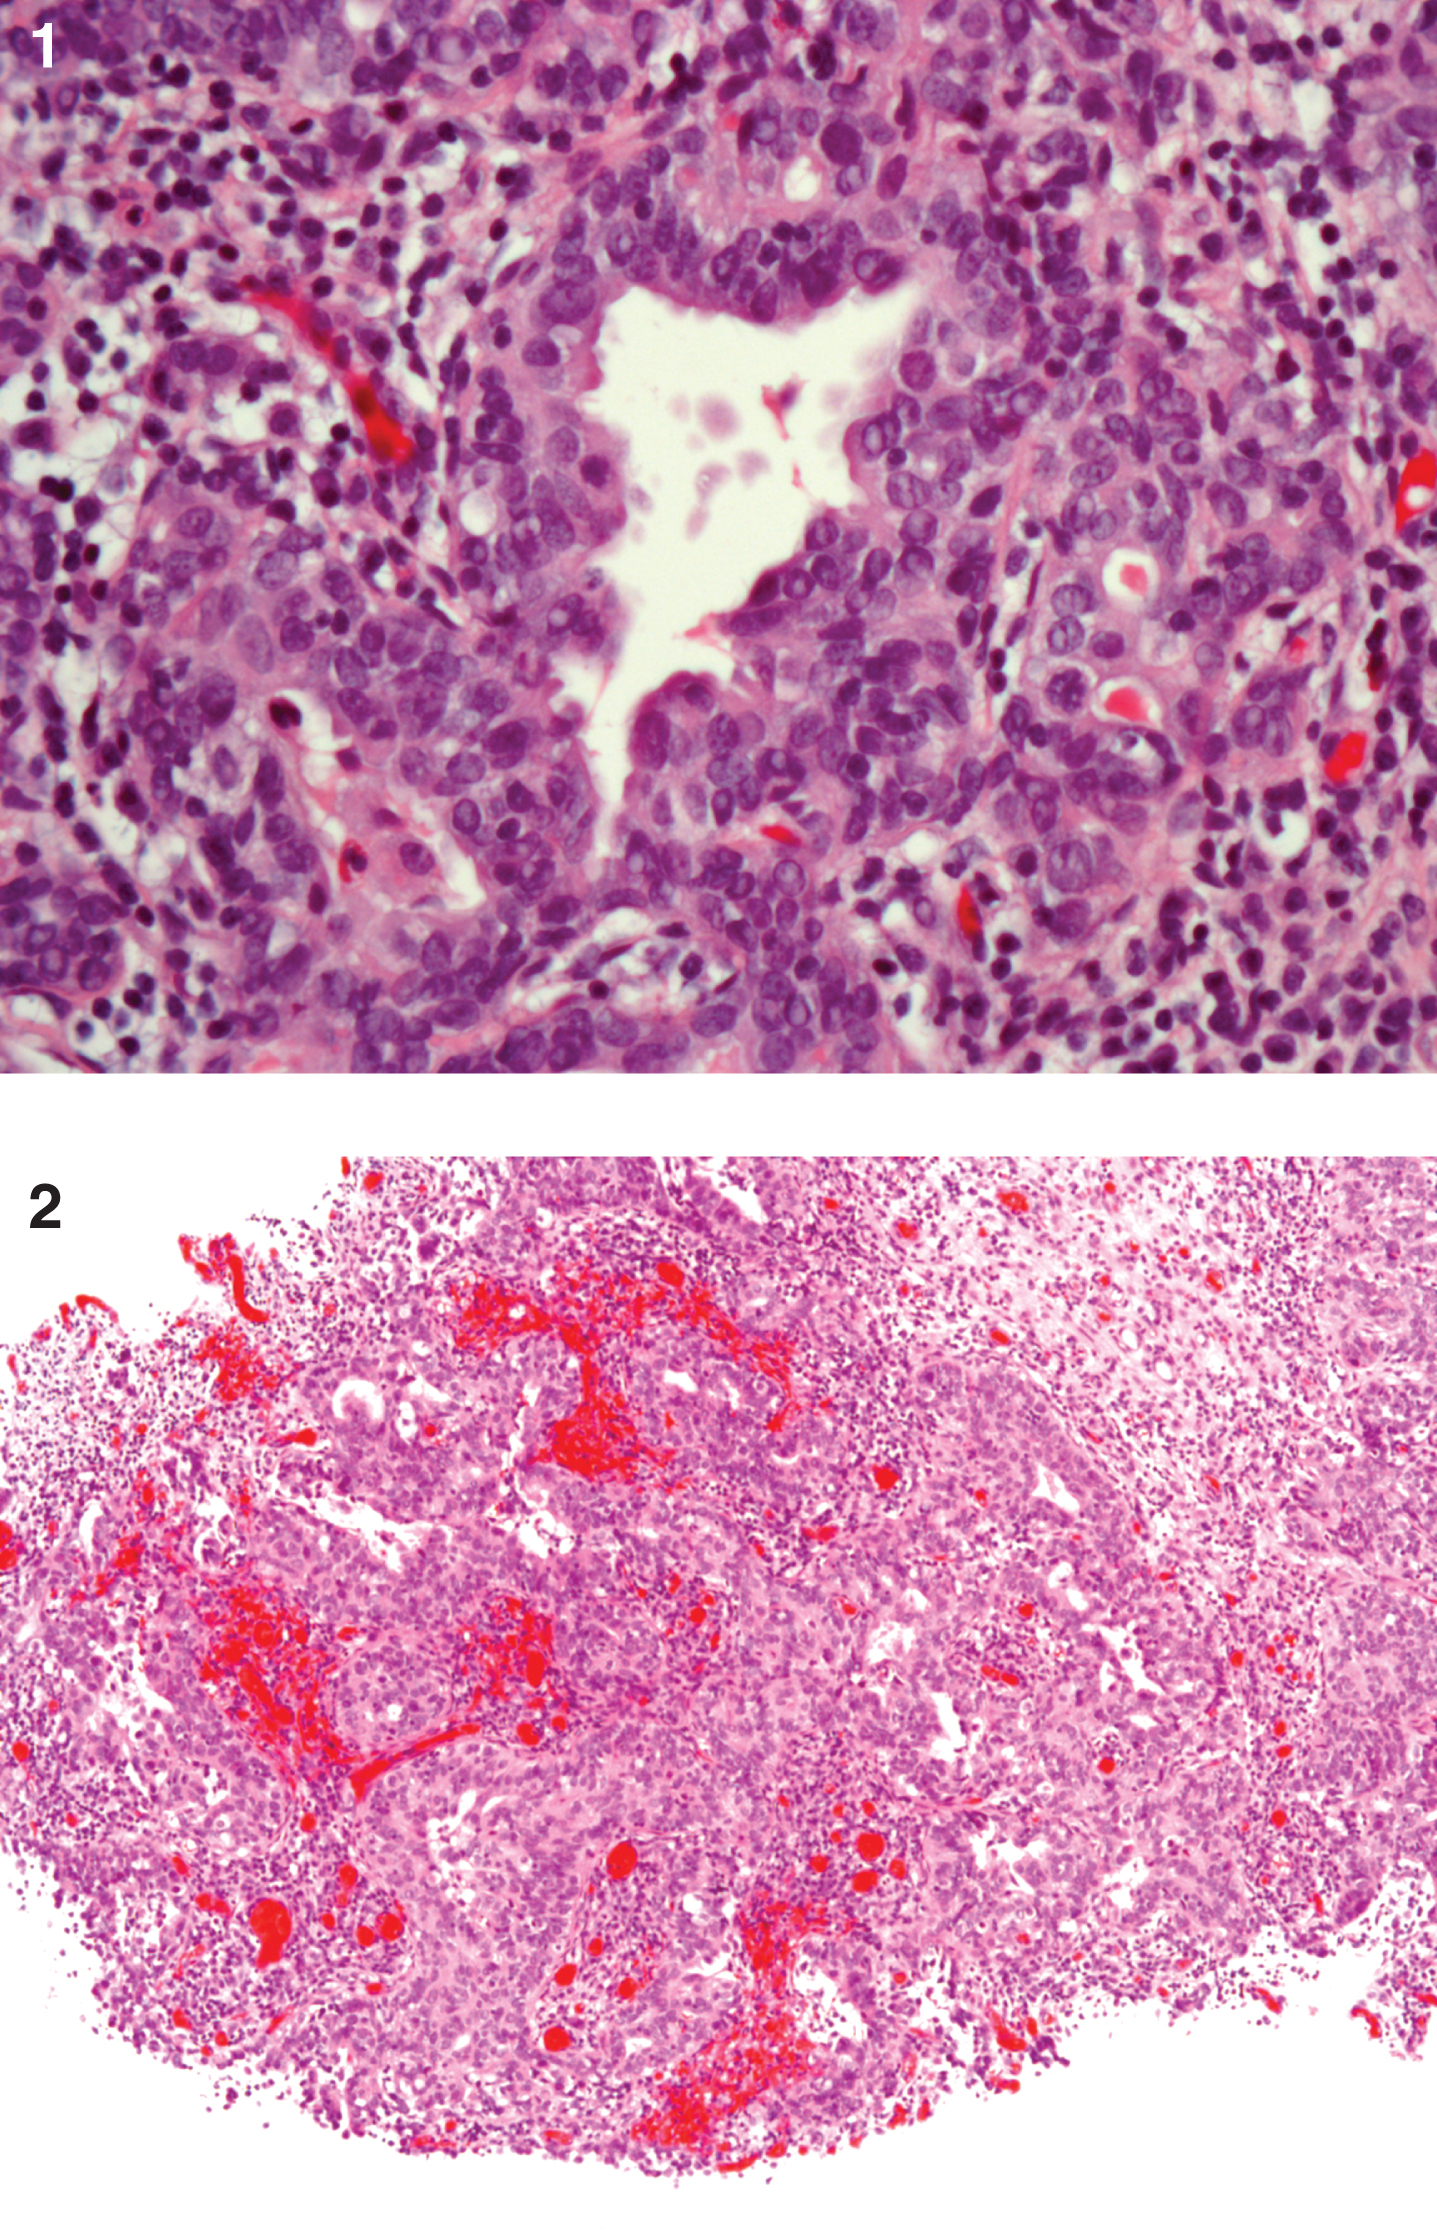 This is a high grade urothelial carcinoma (UC) with adenocarcinoma which is invasive into the lamina propria. Muscularis propria is present and not involved with cancer. There is an in situ component as well as an invasive component which is gland forming without mucin production. The tumor is GATA 3 positive (for UC). The tumor is >50% positive for Ki67.